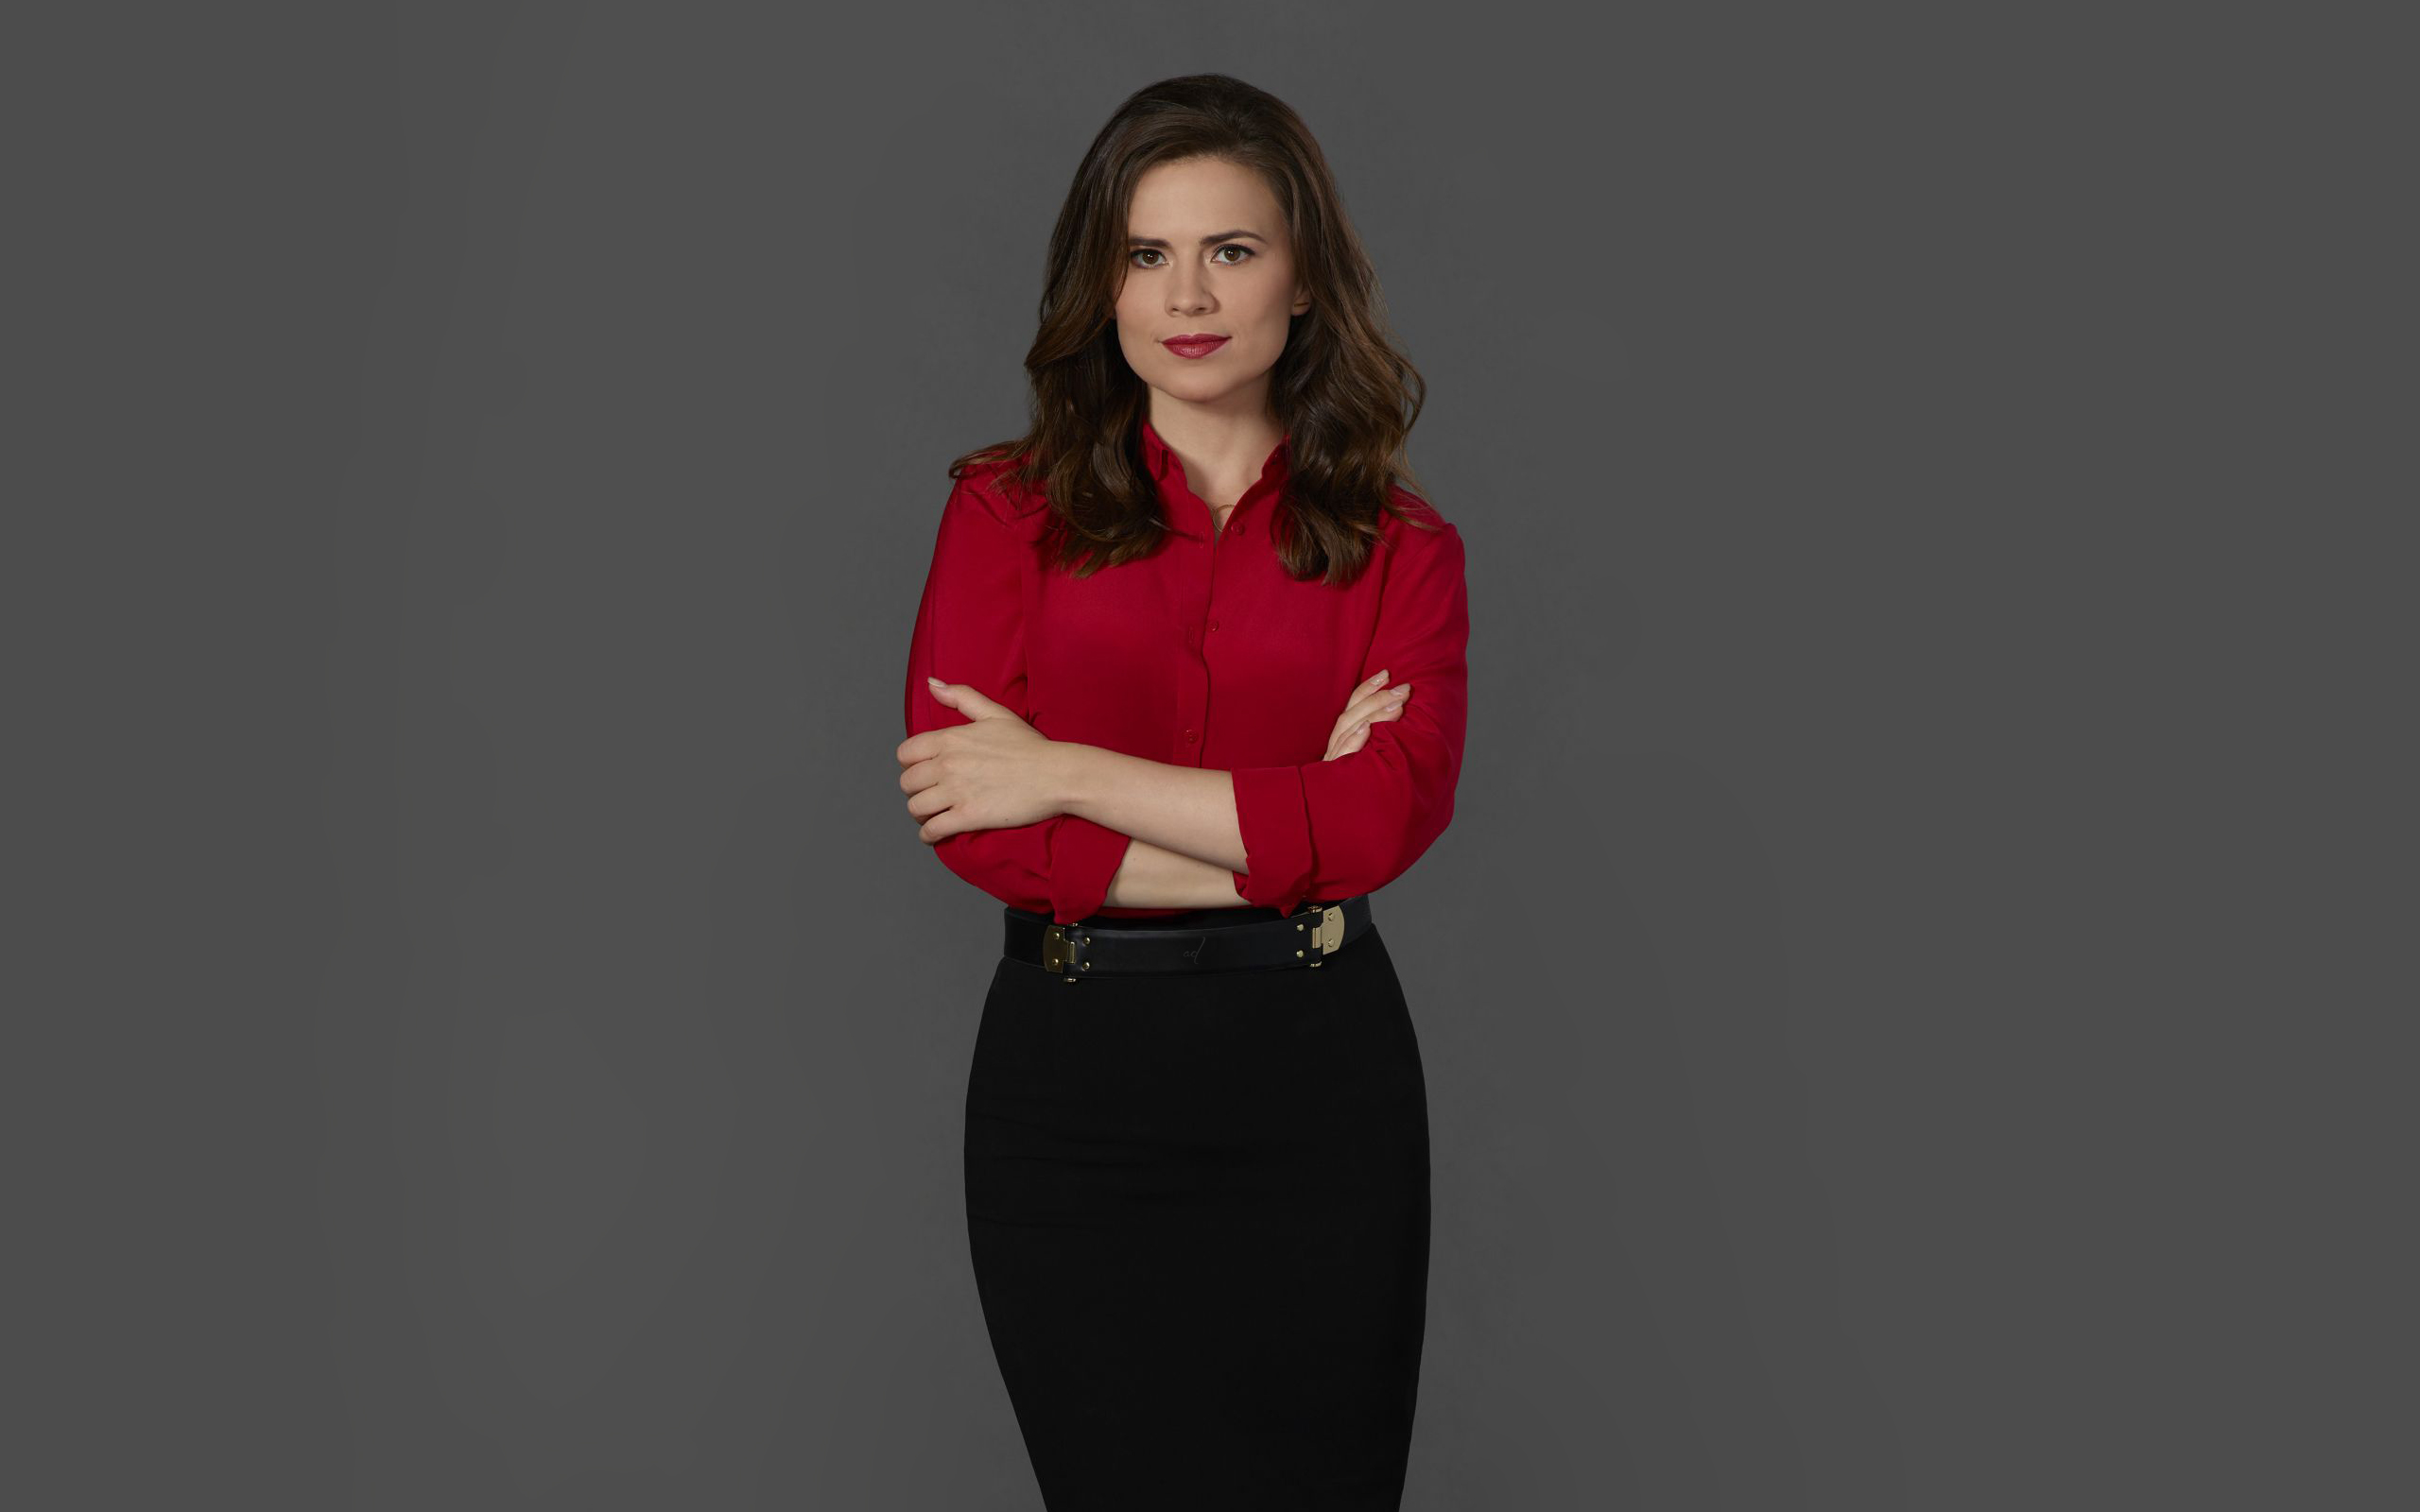 Hayley Atwell Brunette Actress Skirt Gray Background Arms Crossed Red Shirt Women 2560x1600